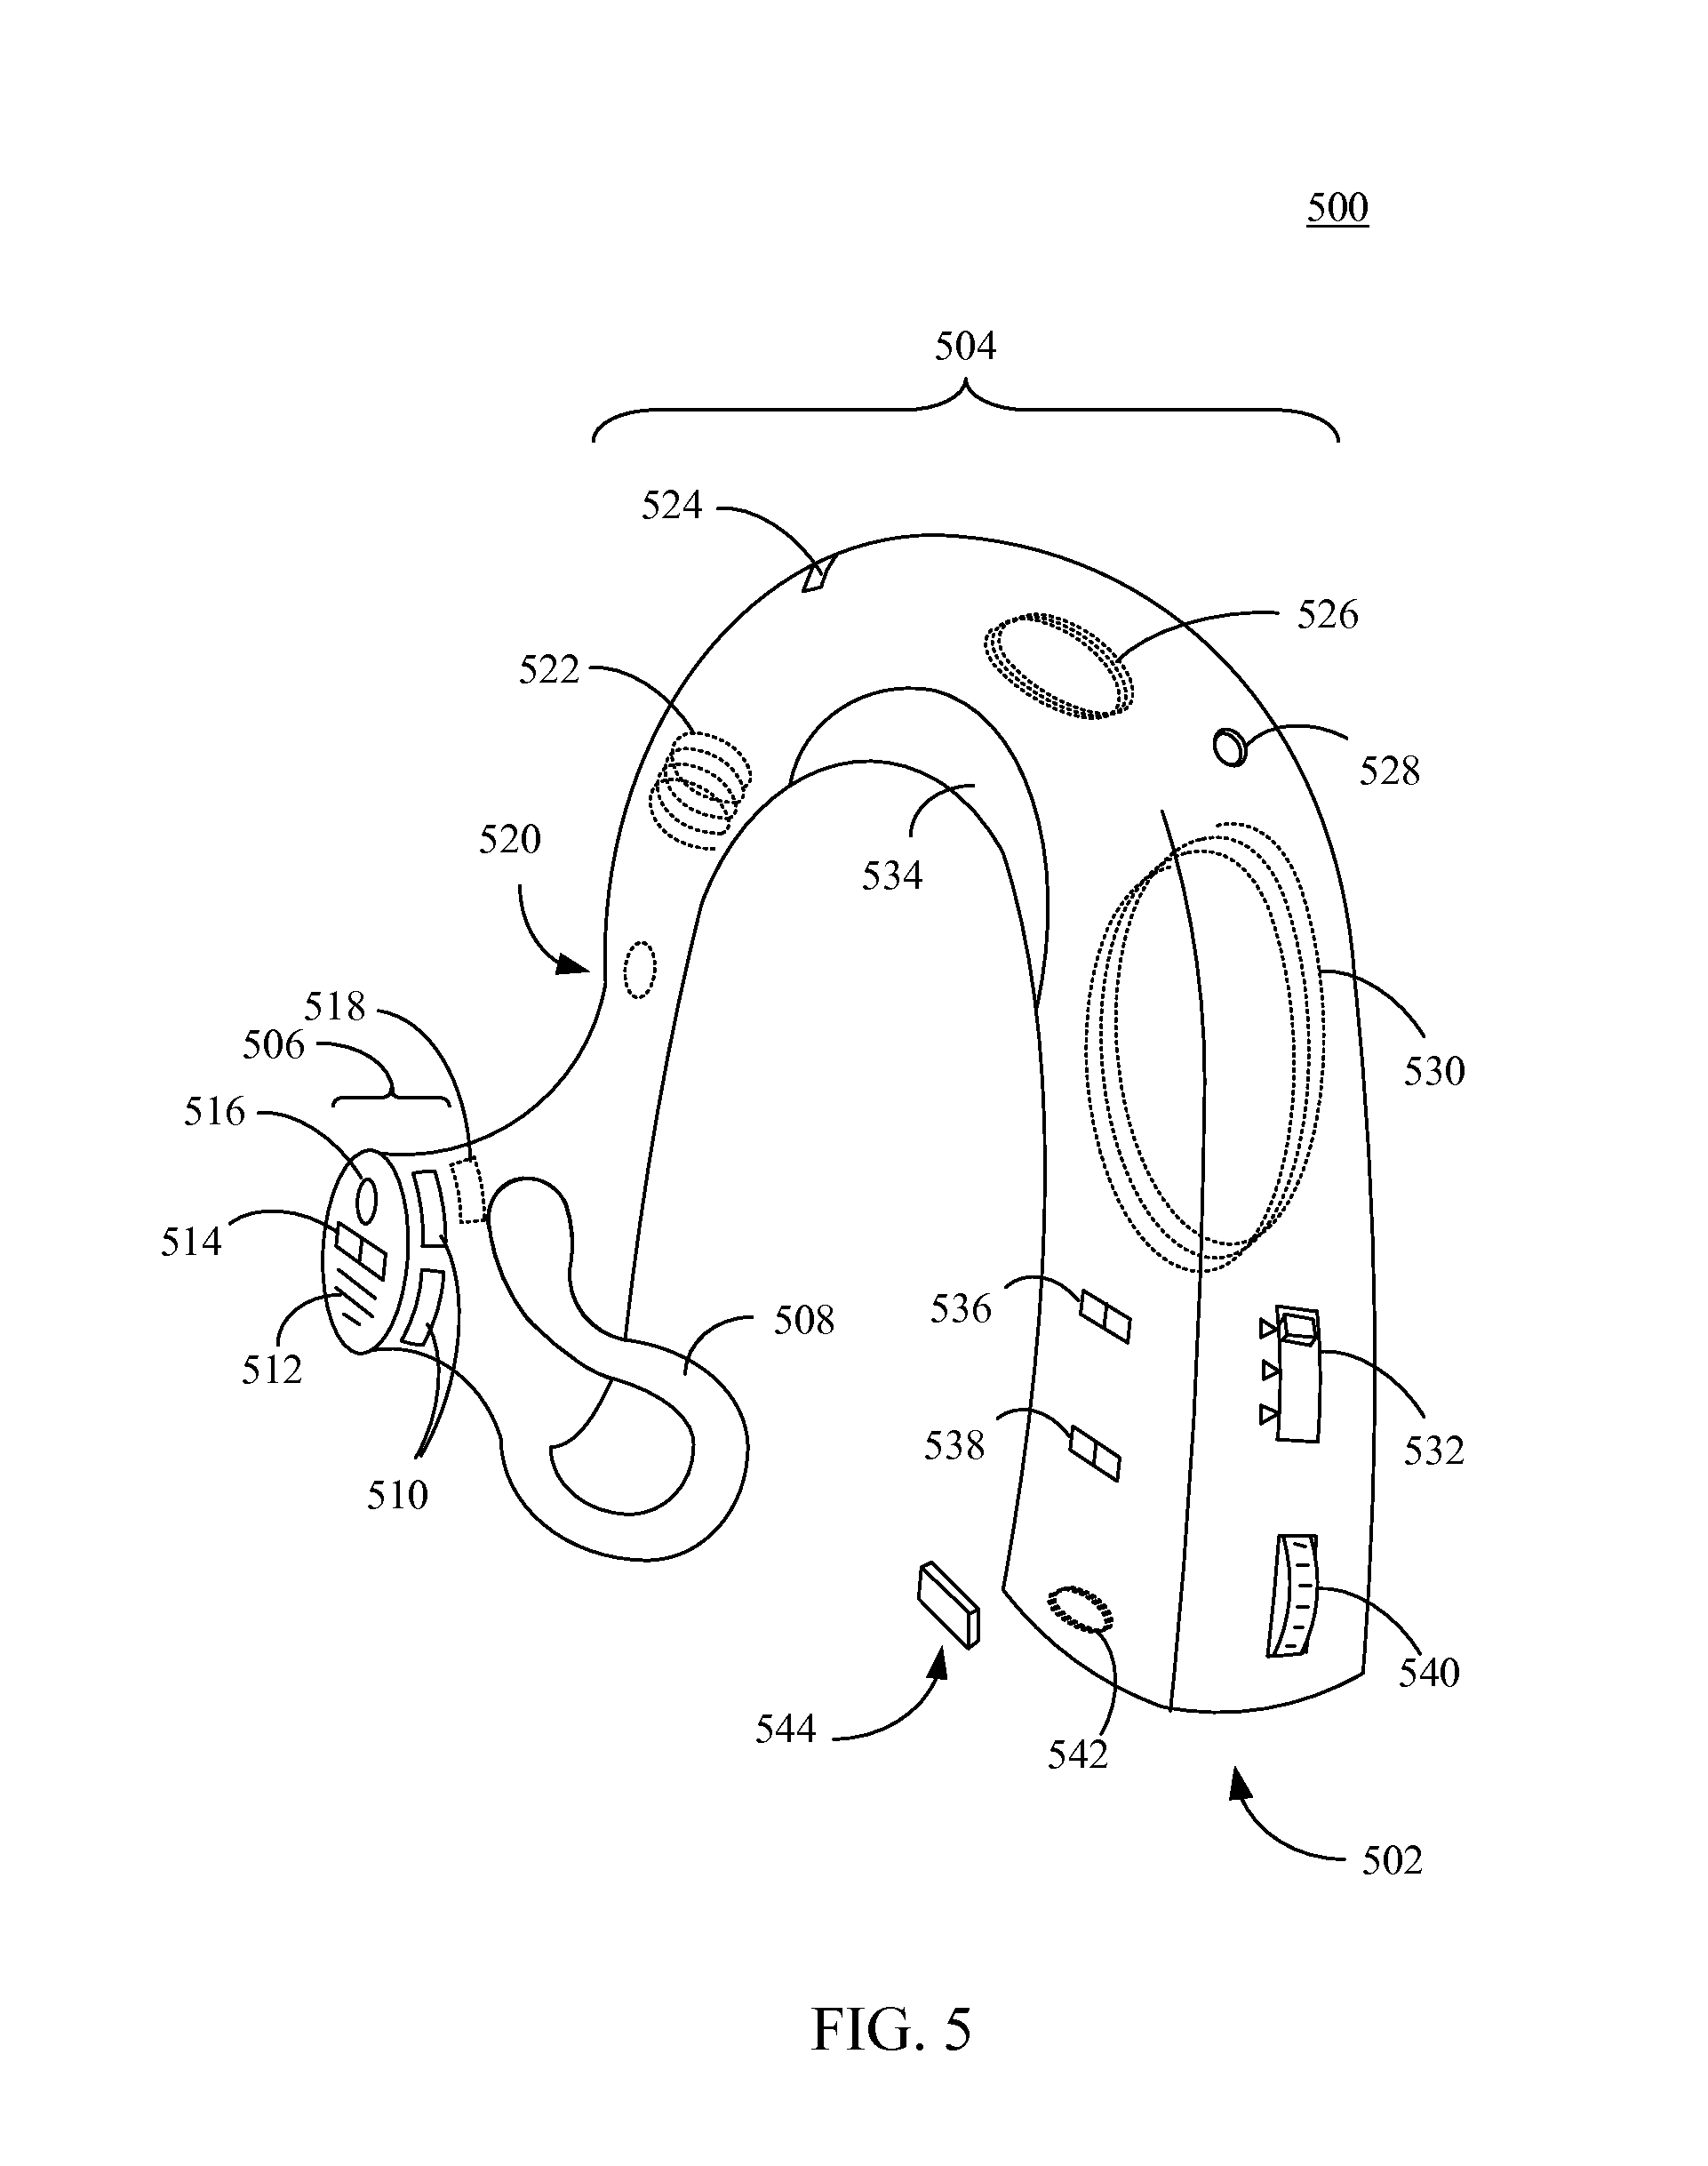 Multisensor hearing assist device for health